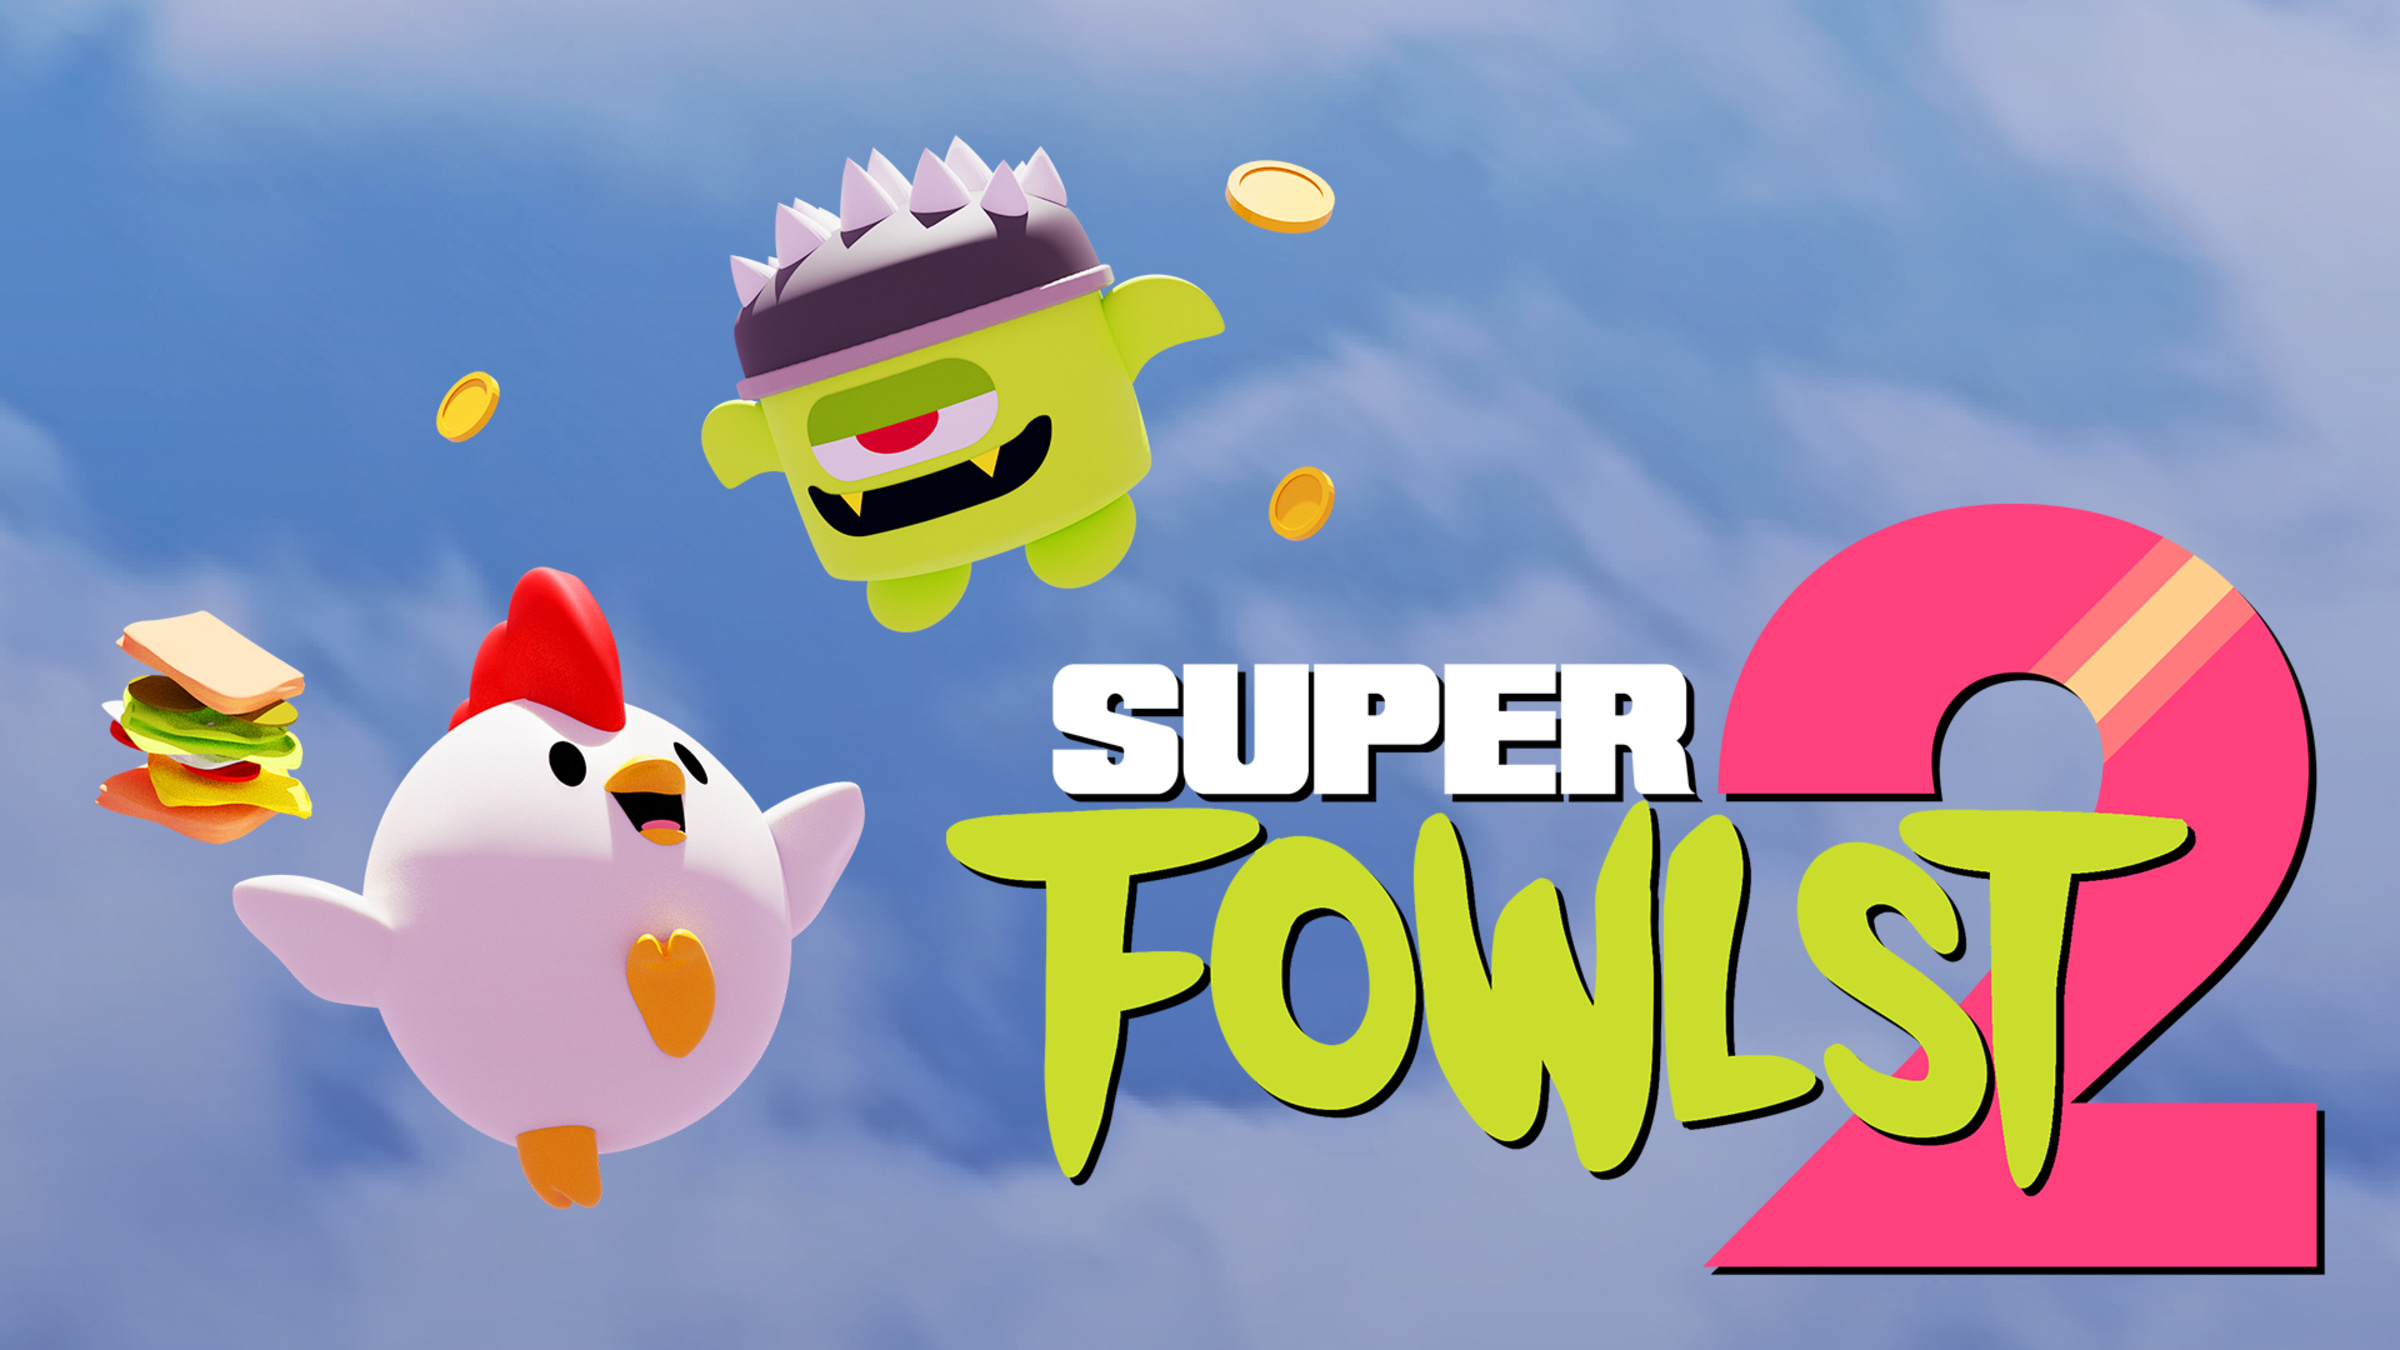 SUPER FOWLST 2 - Play Online for Free!